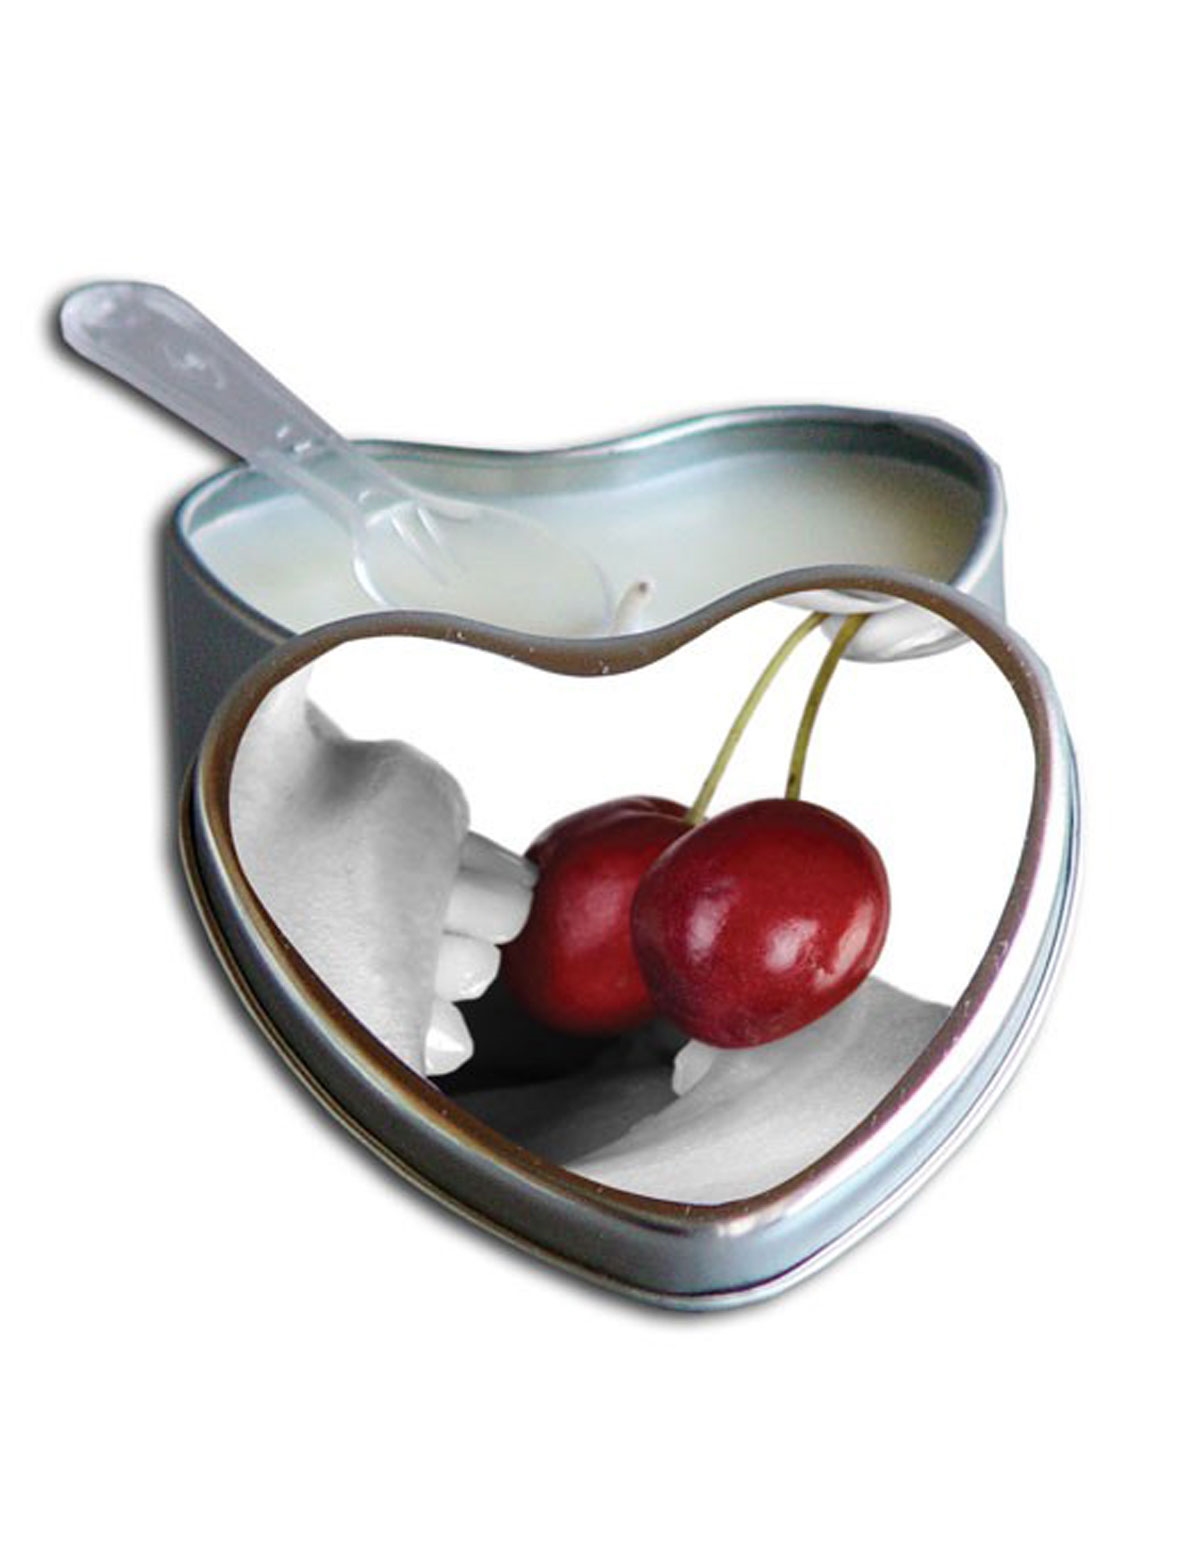 alternate image for Cherry Edible Massage Candle